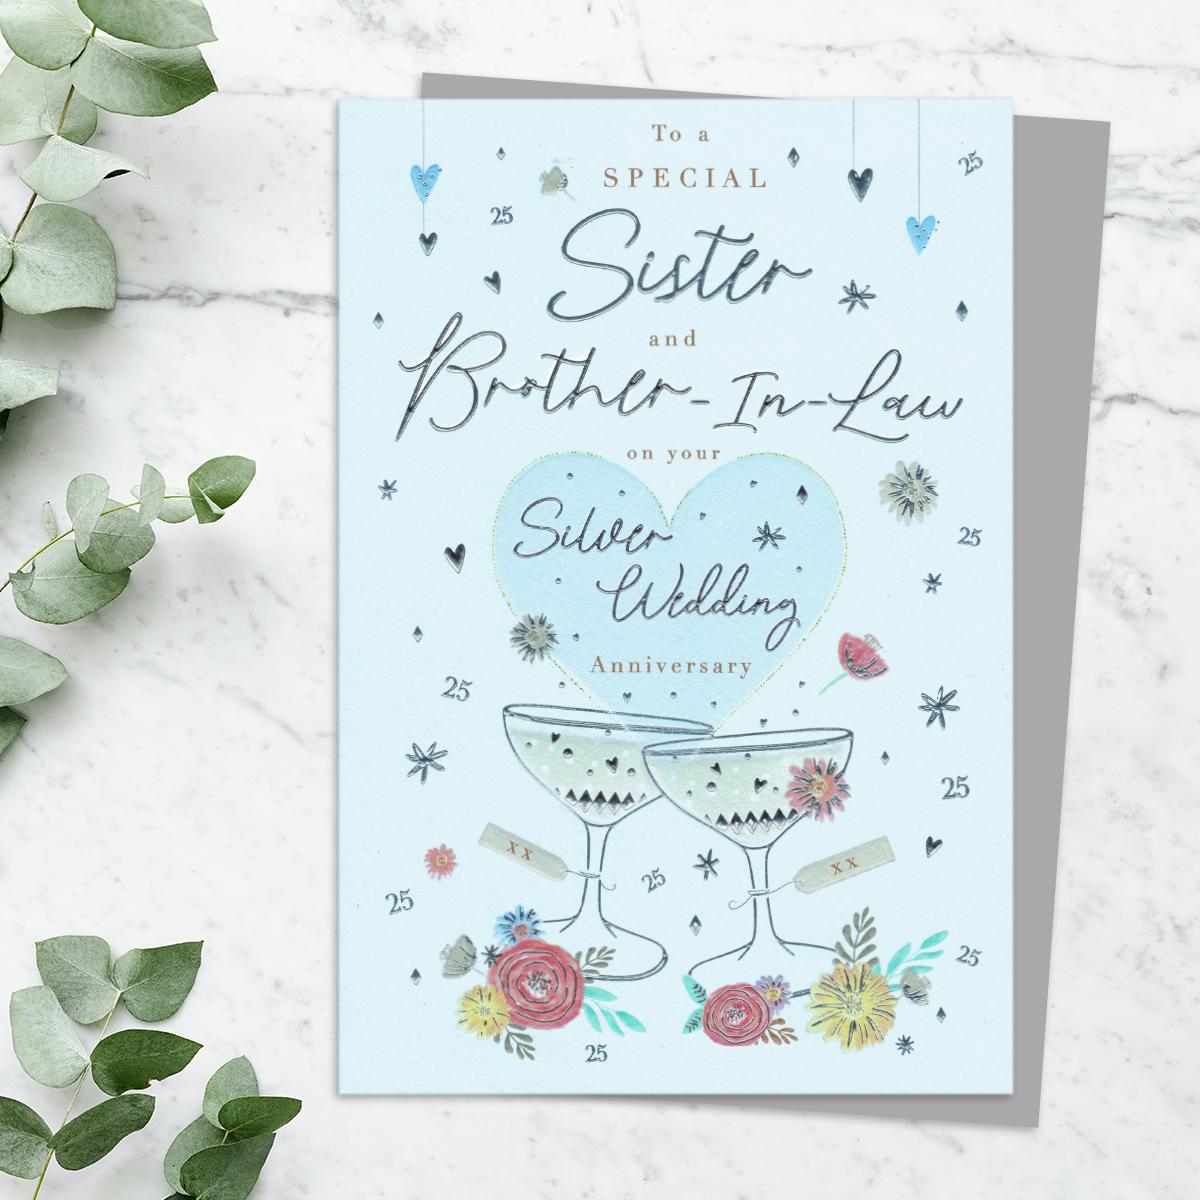 Sister And Brother In Law Silver Anniversary Card Featuring A Champagne Bottle And Glasses To Toast